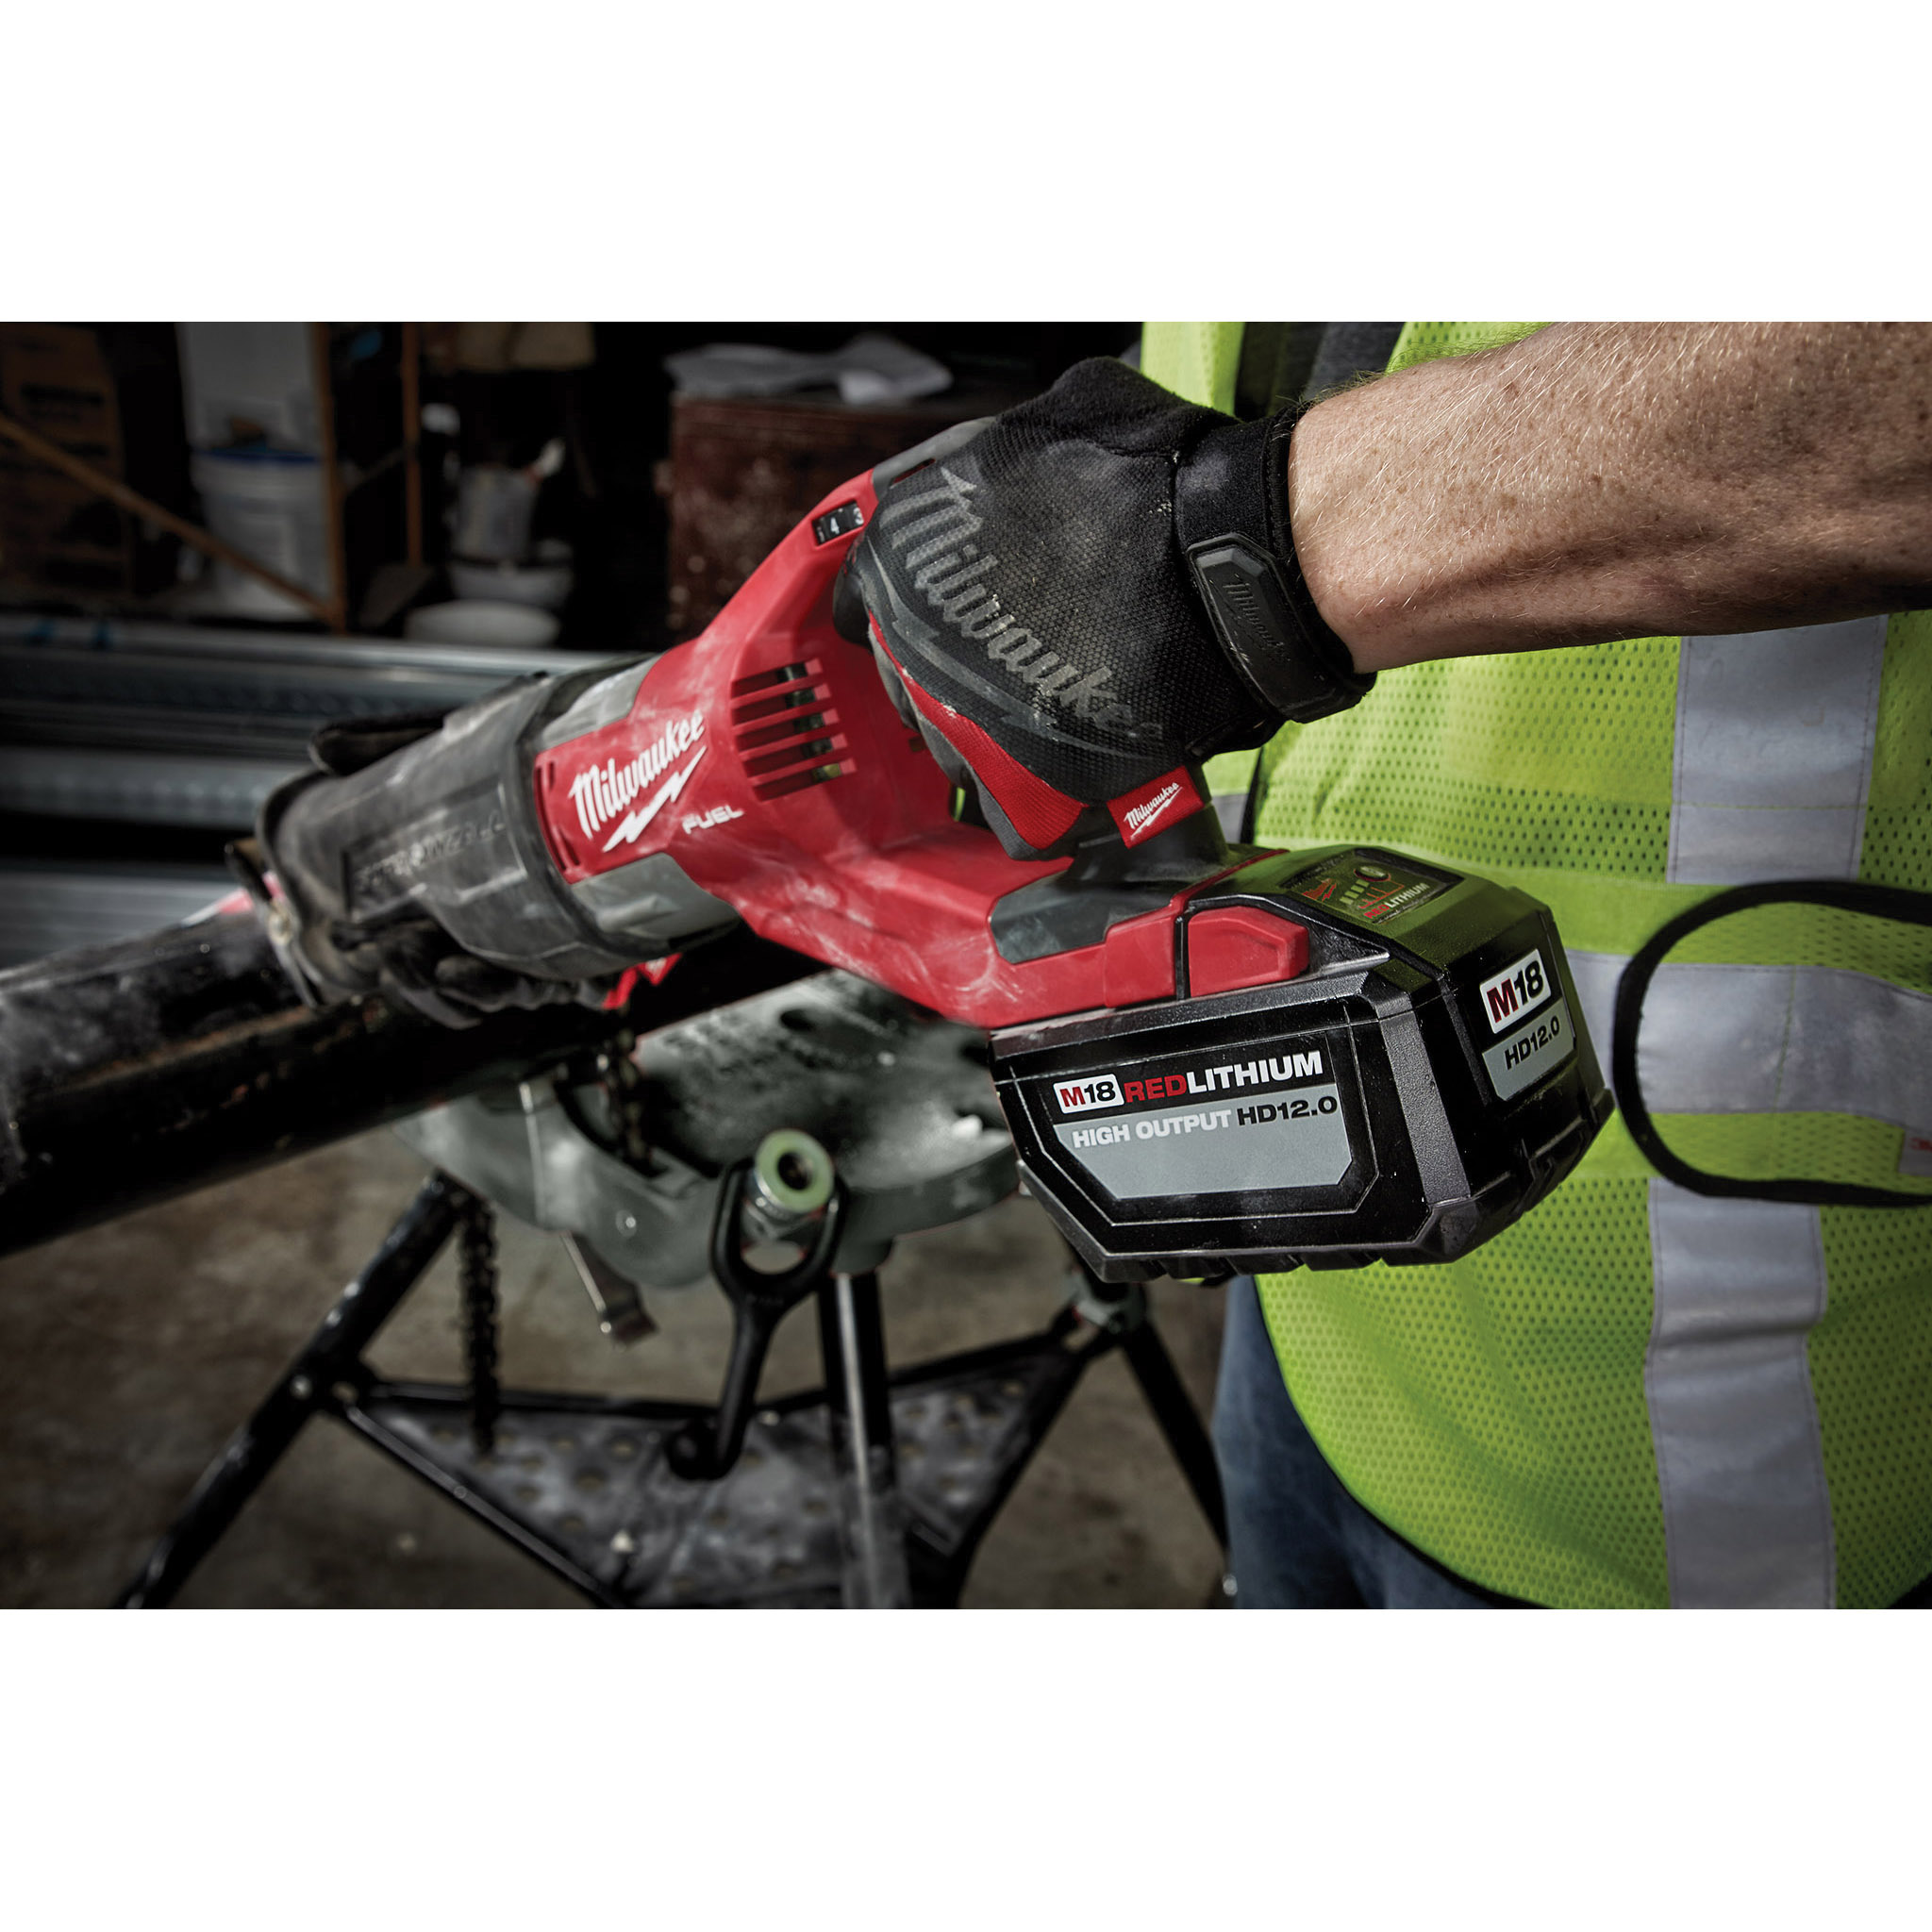 Milwaukee M18 REDLITHIUM 48-11-1812 Rechargeable Battery Pack, 18 V Battery, 12 Ah, 1-1/2 hr Charging - 4